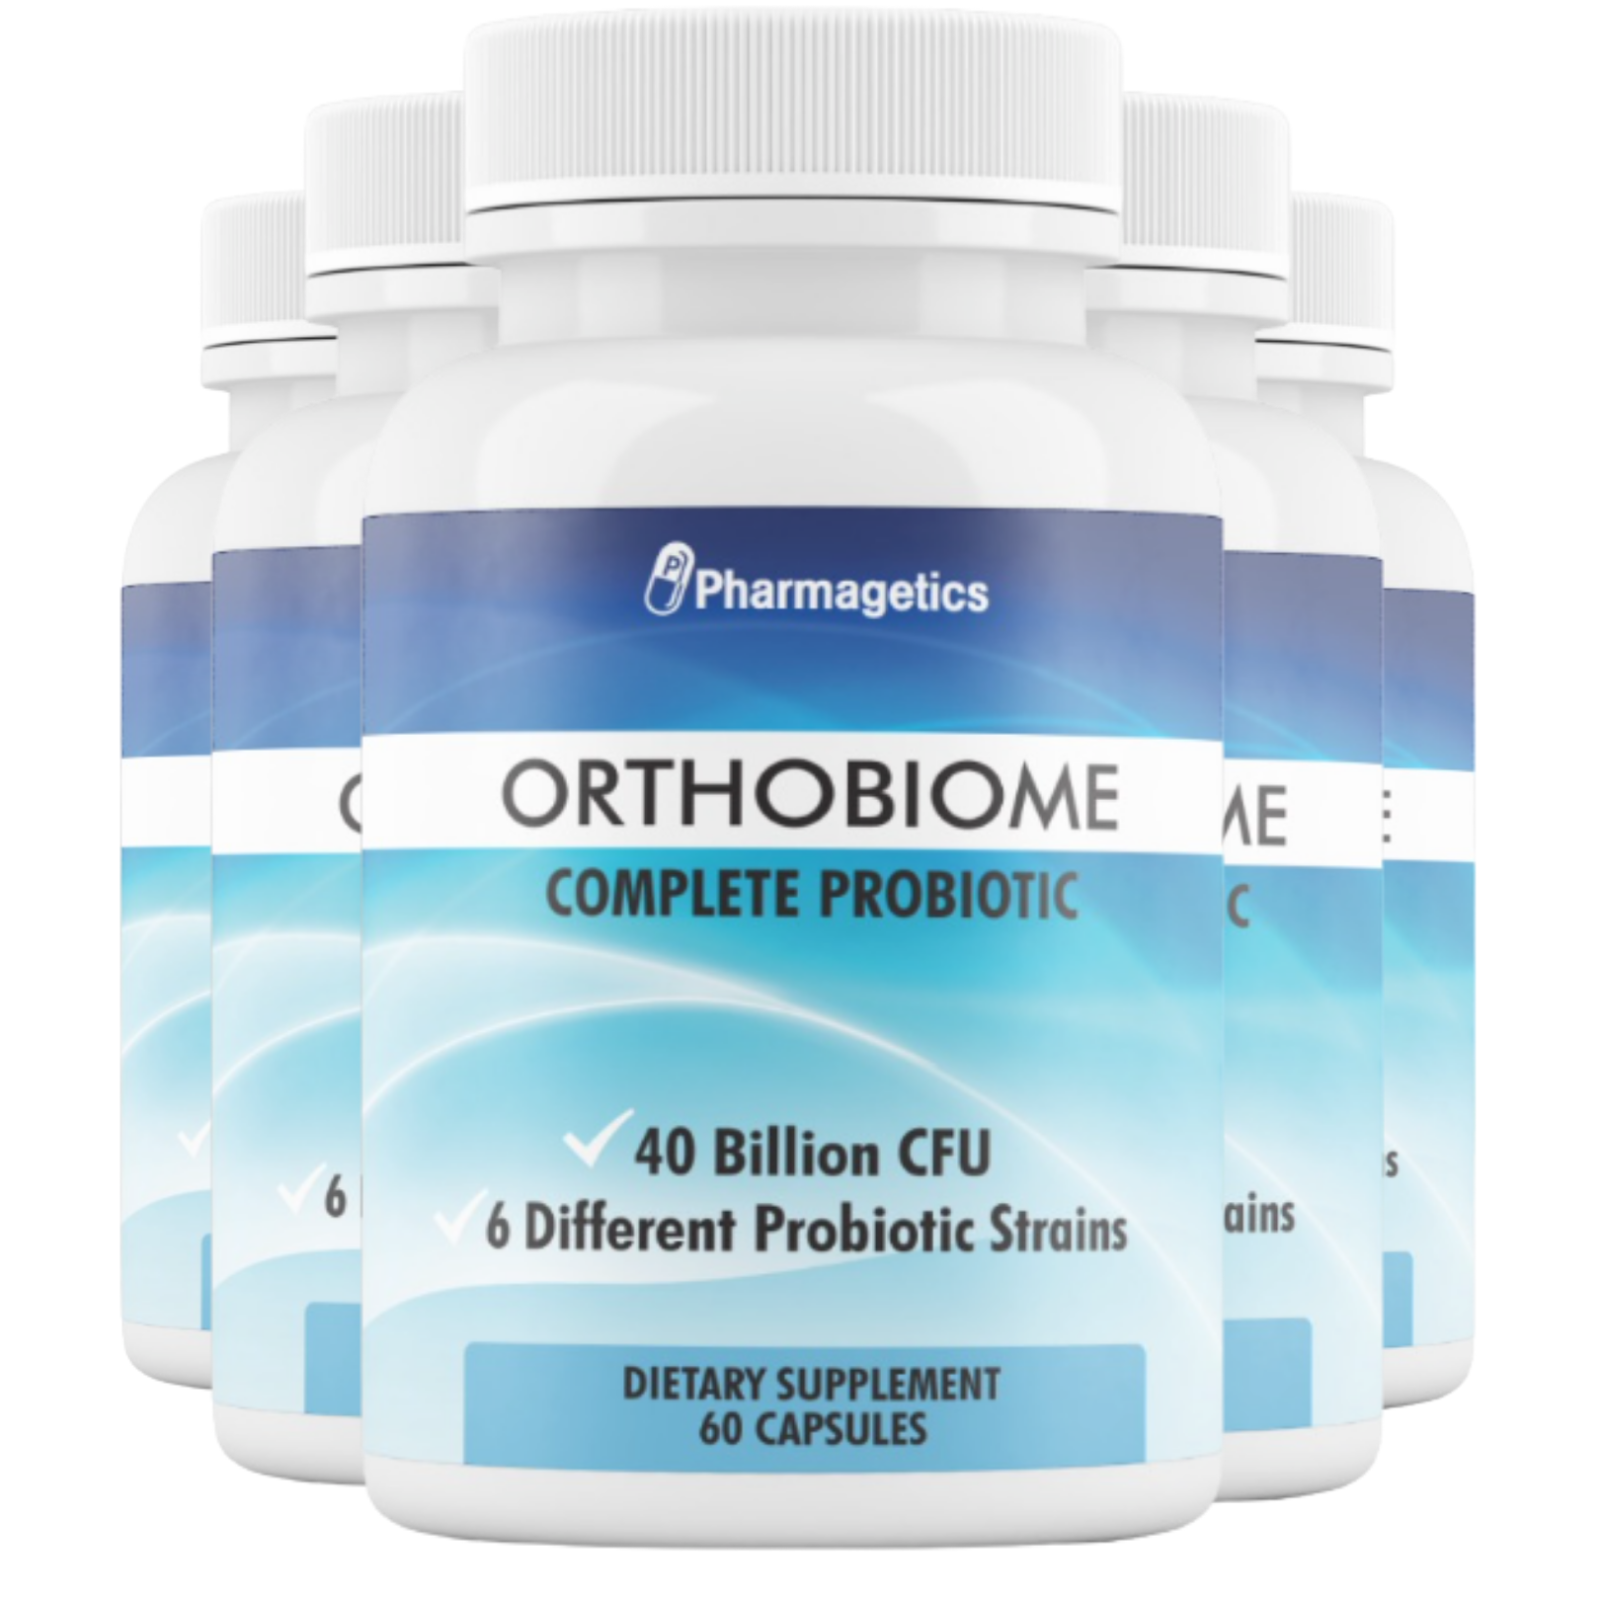 5 Bottles Orthobiome Complete Probiotic Pills Ortho Biome 60 Capsules